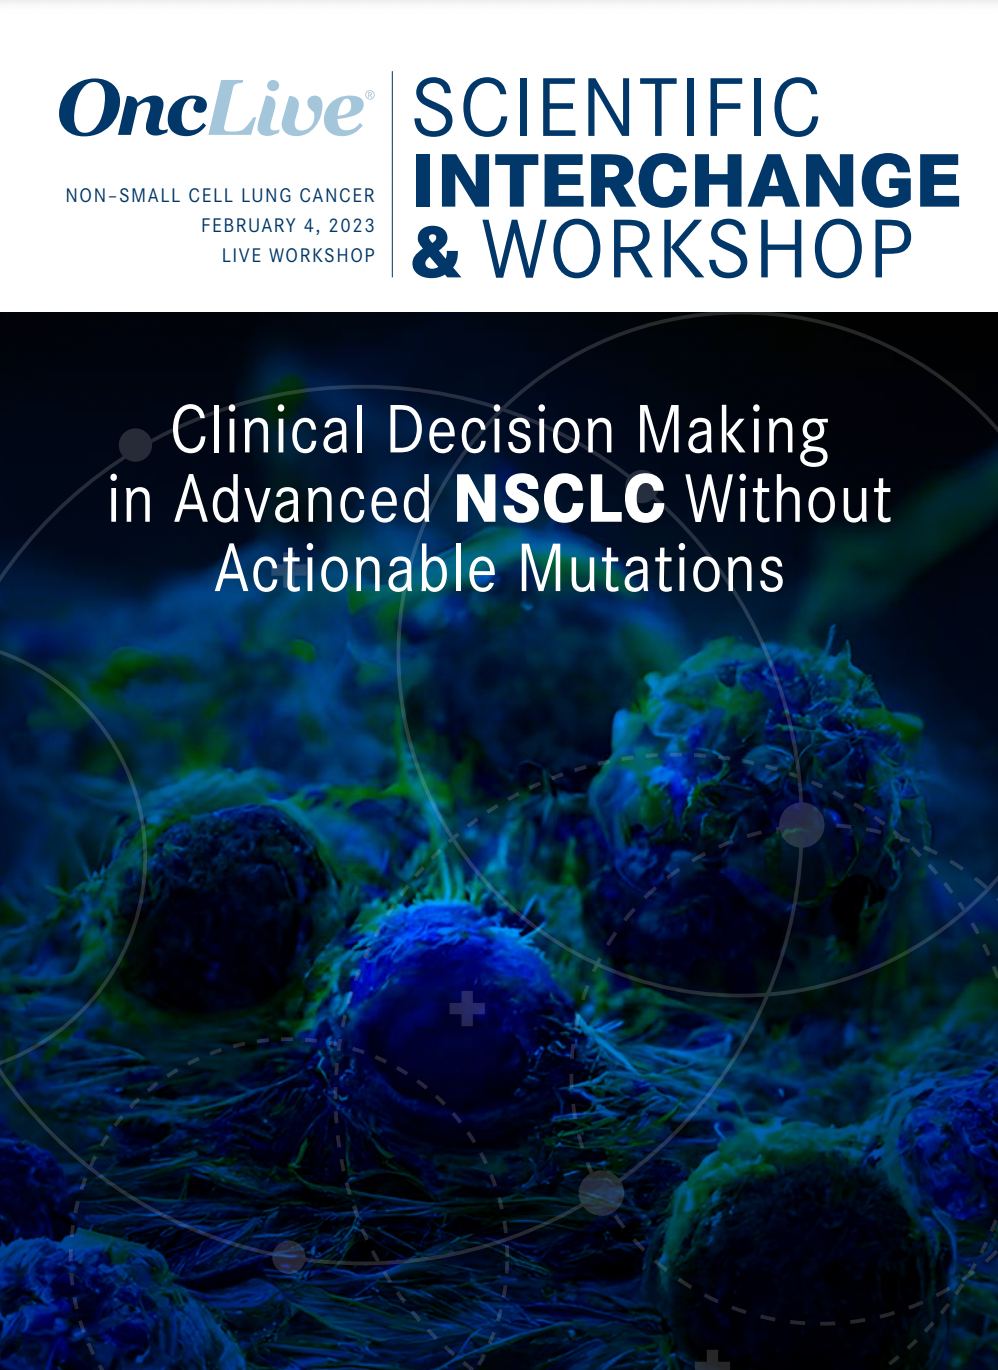 Clinical Decision Making in Advanced NSCLC without Actionable Mutations